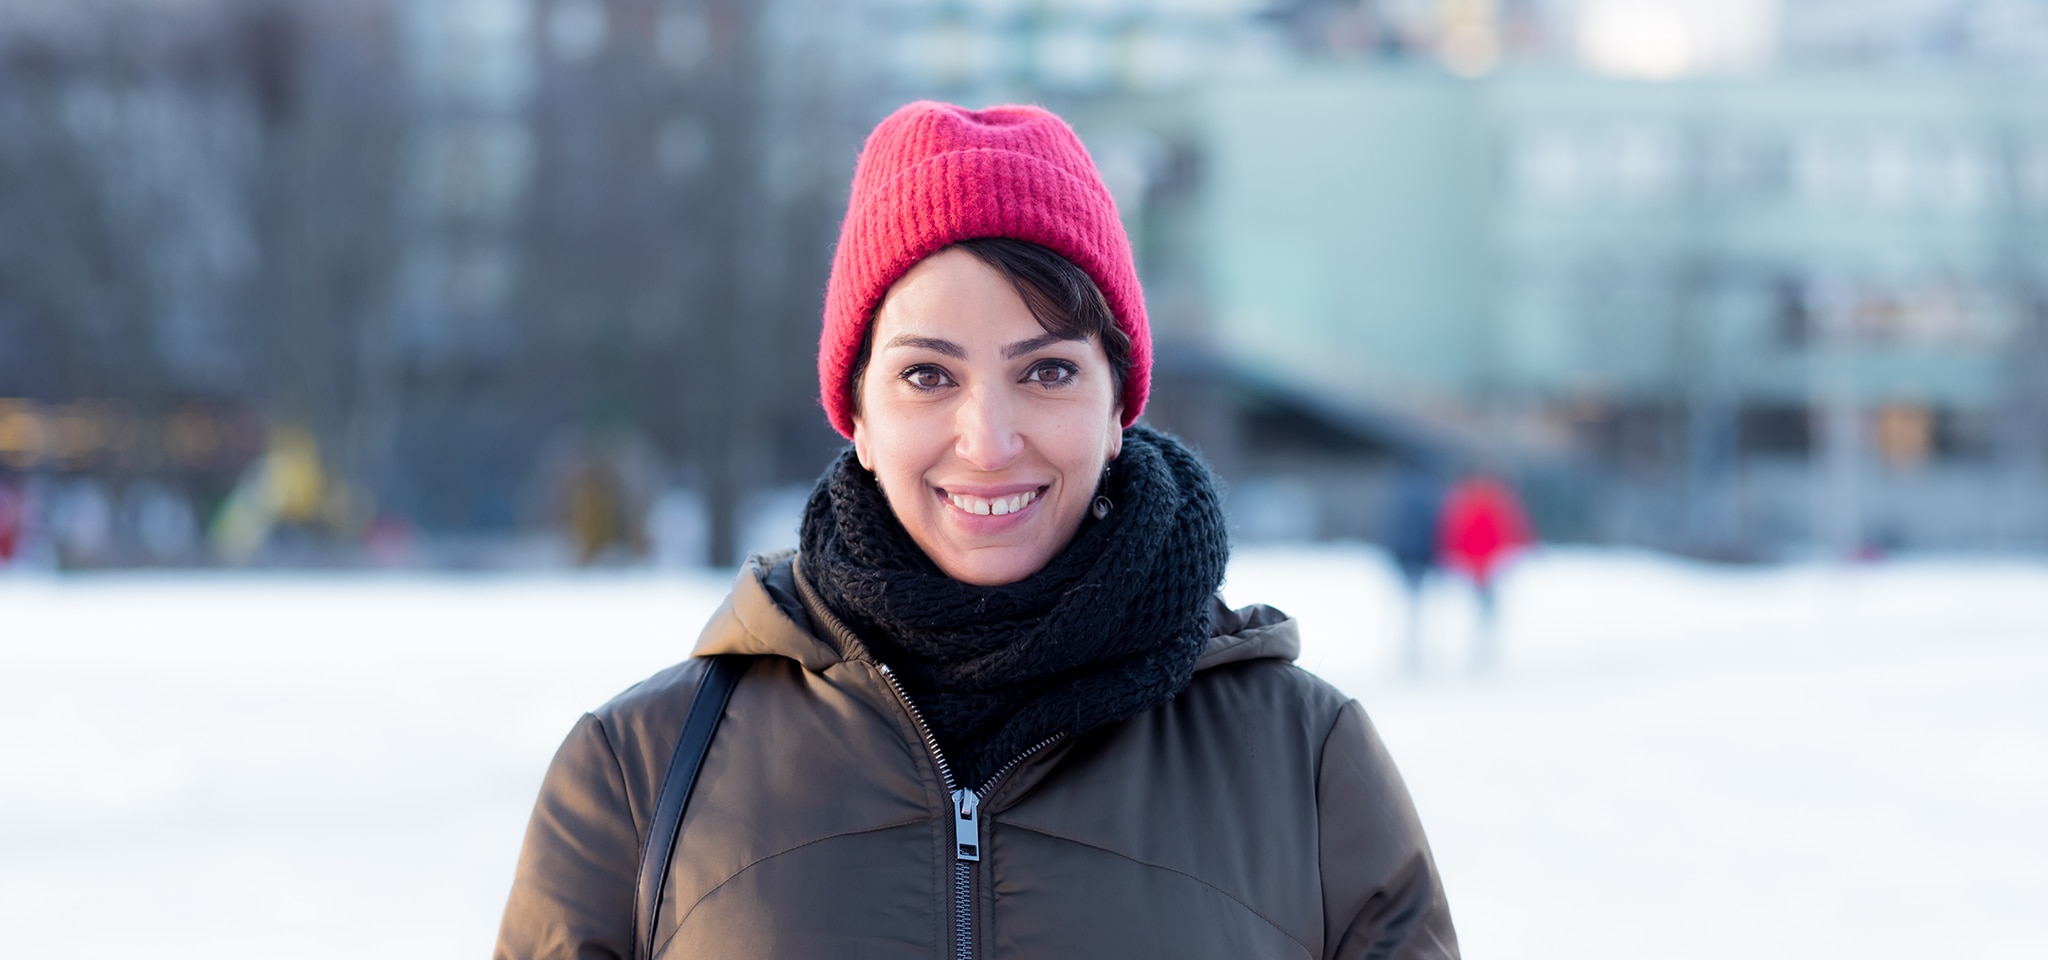 woman wearing a beanie smiling directly at the camera